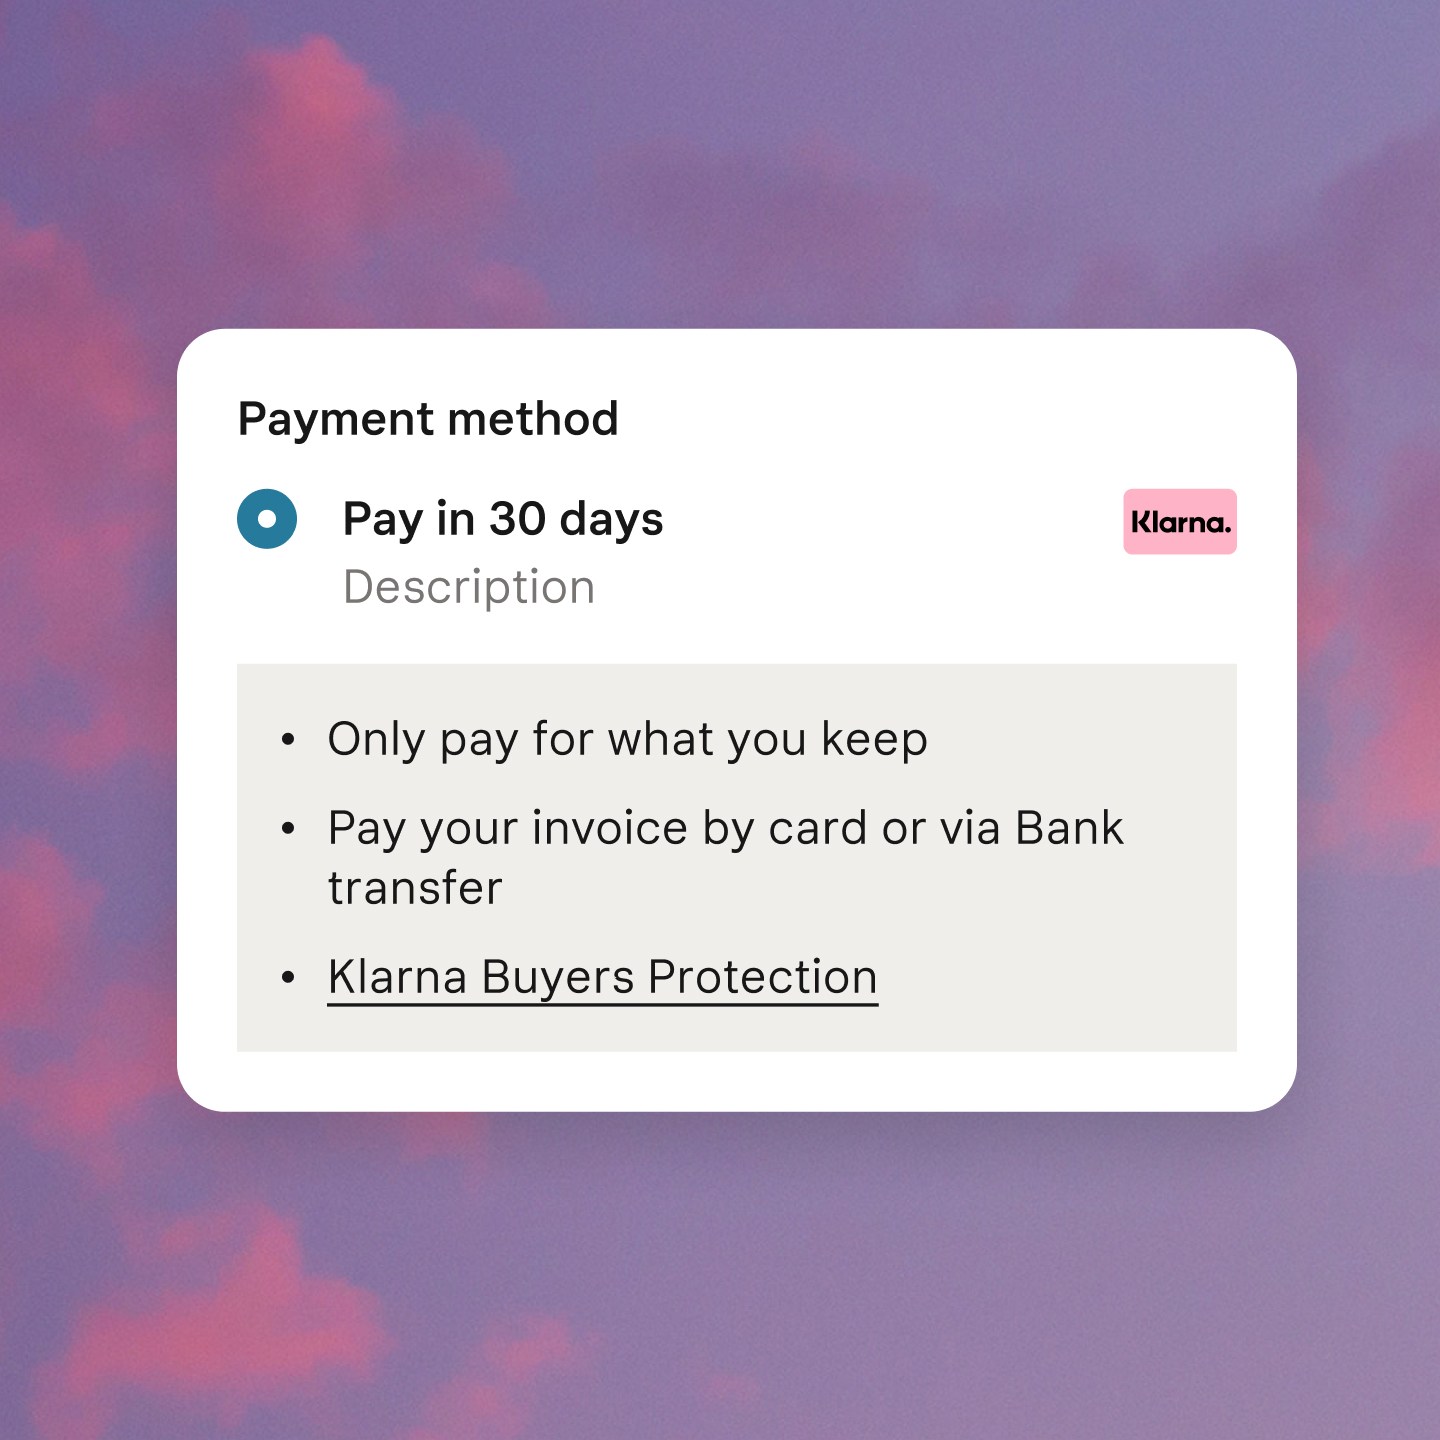 Pay in 30 days